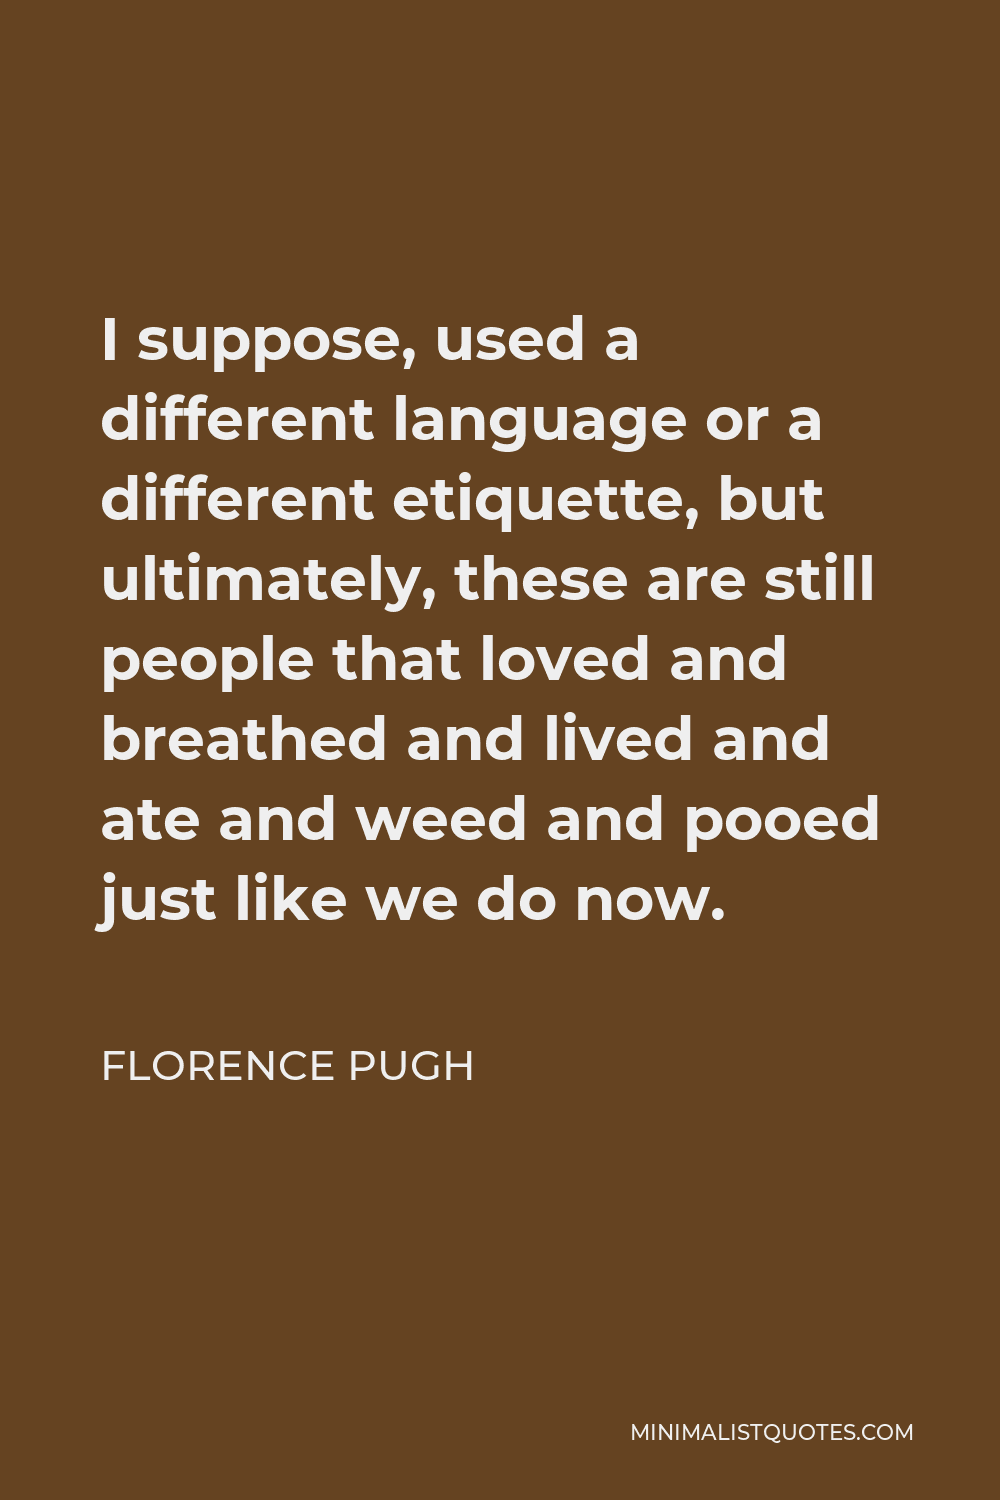 Florence Pugh Quote - I suppose, used a different language or a different etiquette, but ultimately, these are still people that loved and breathed and lived and ate and weed and pooed just like we do now.